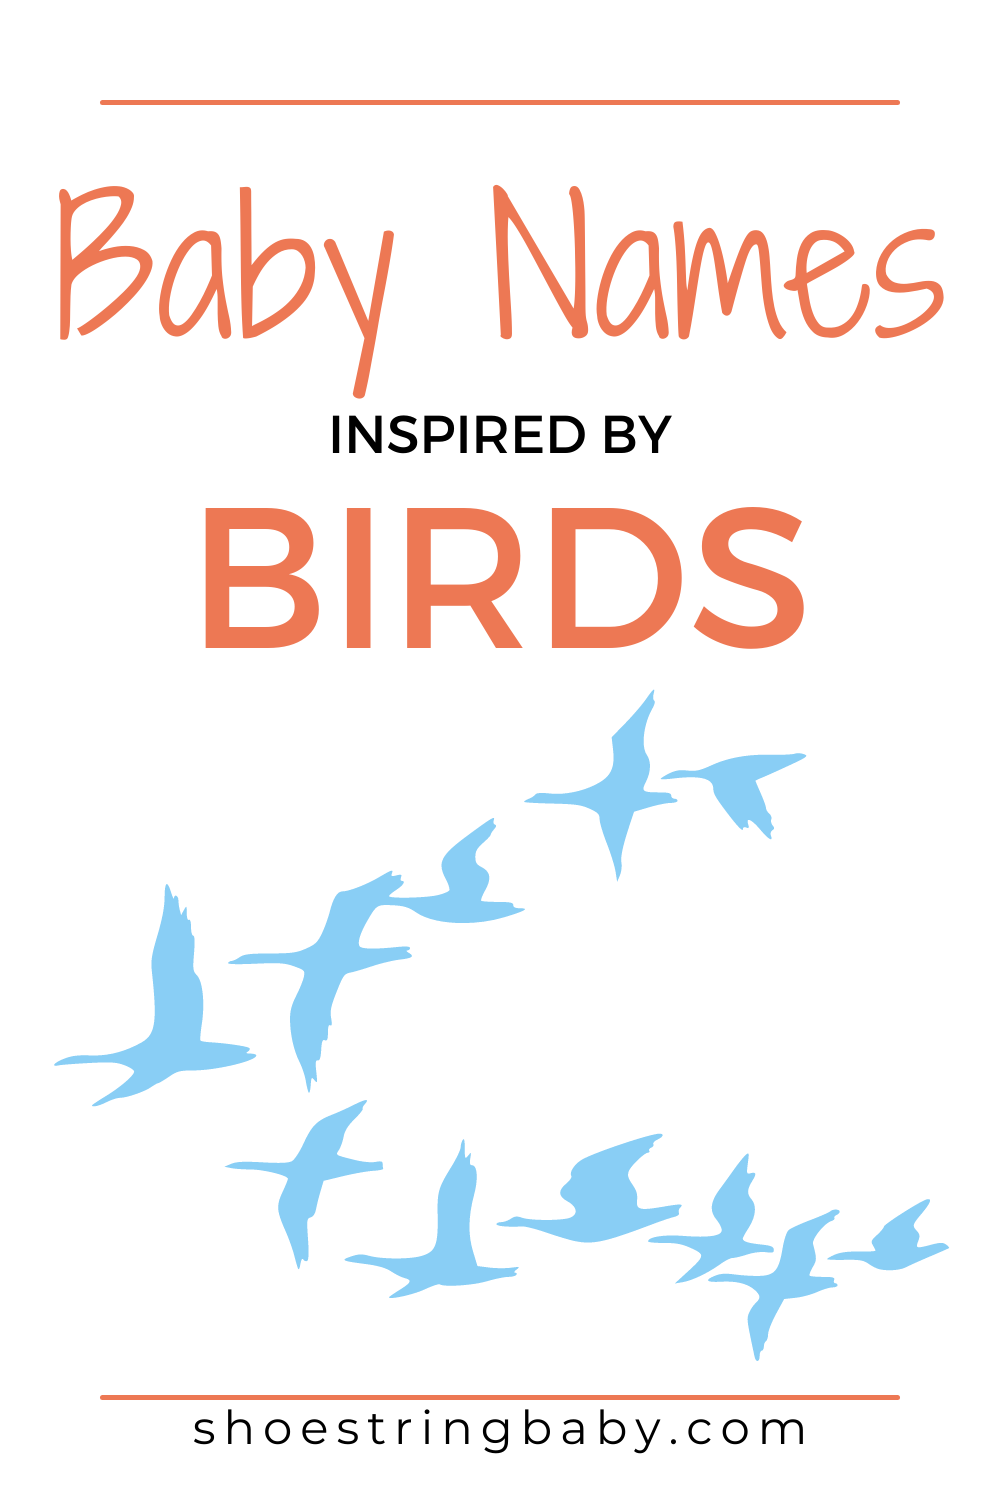 75 Bird Names for Babies That Rule the Roost